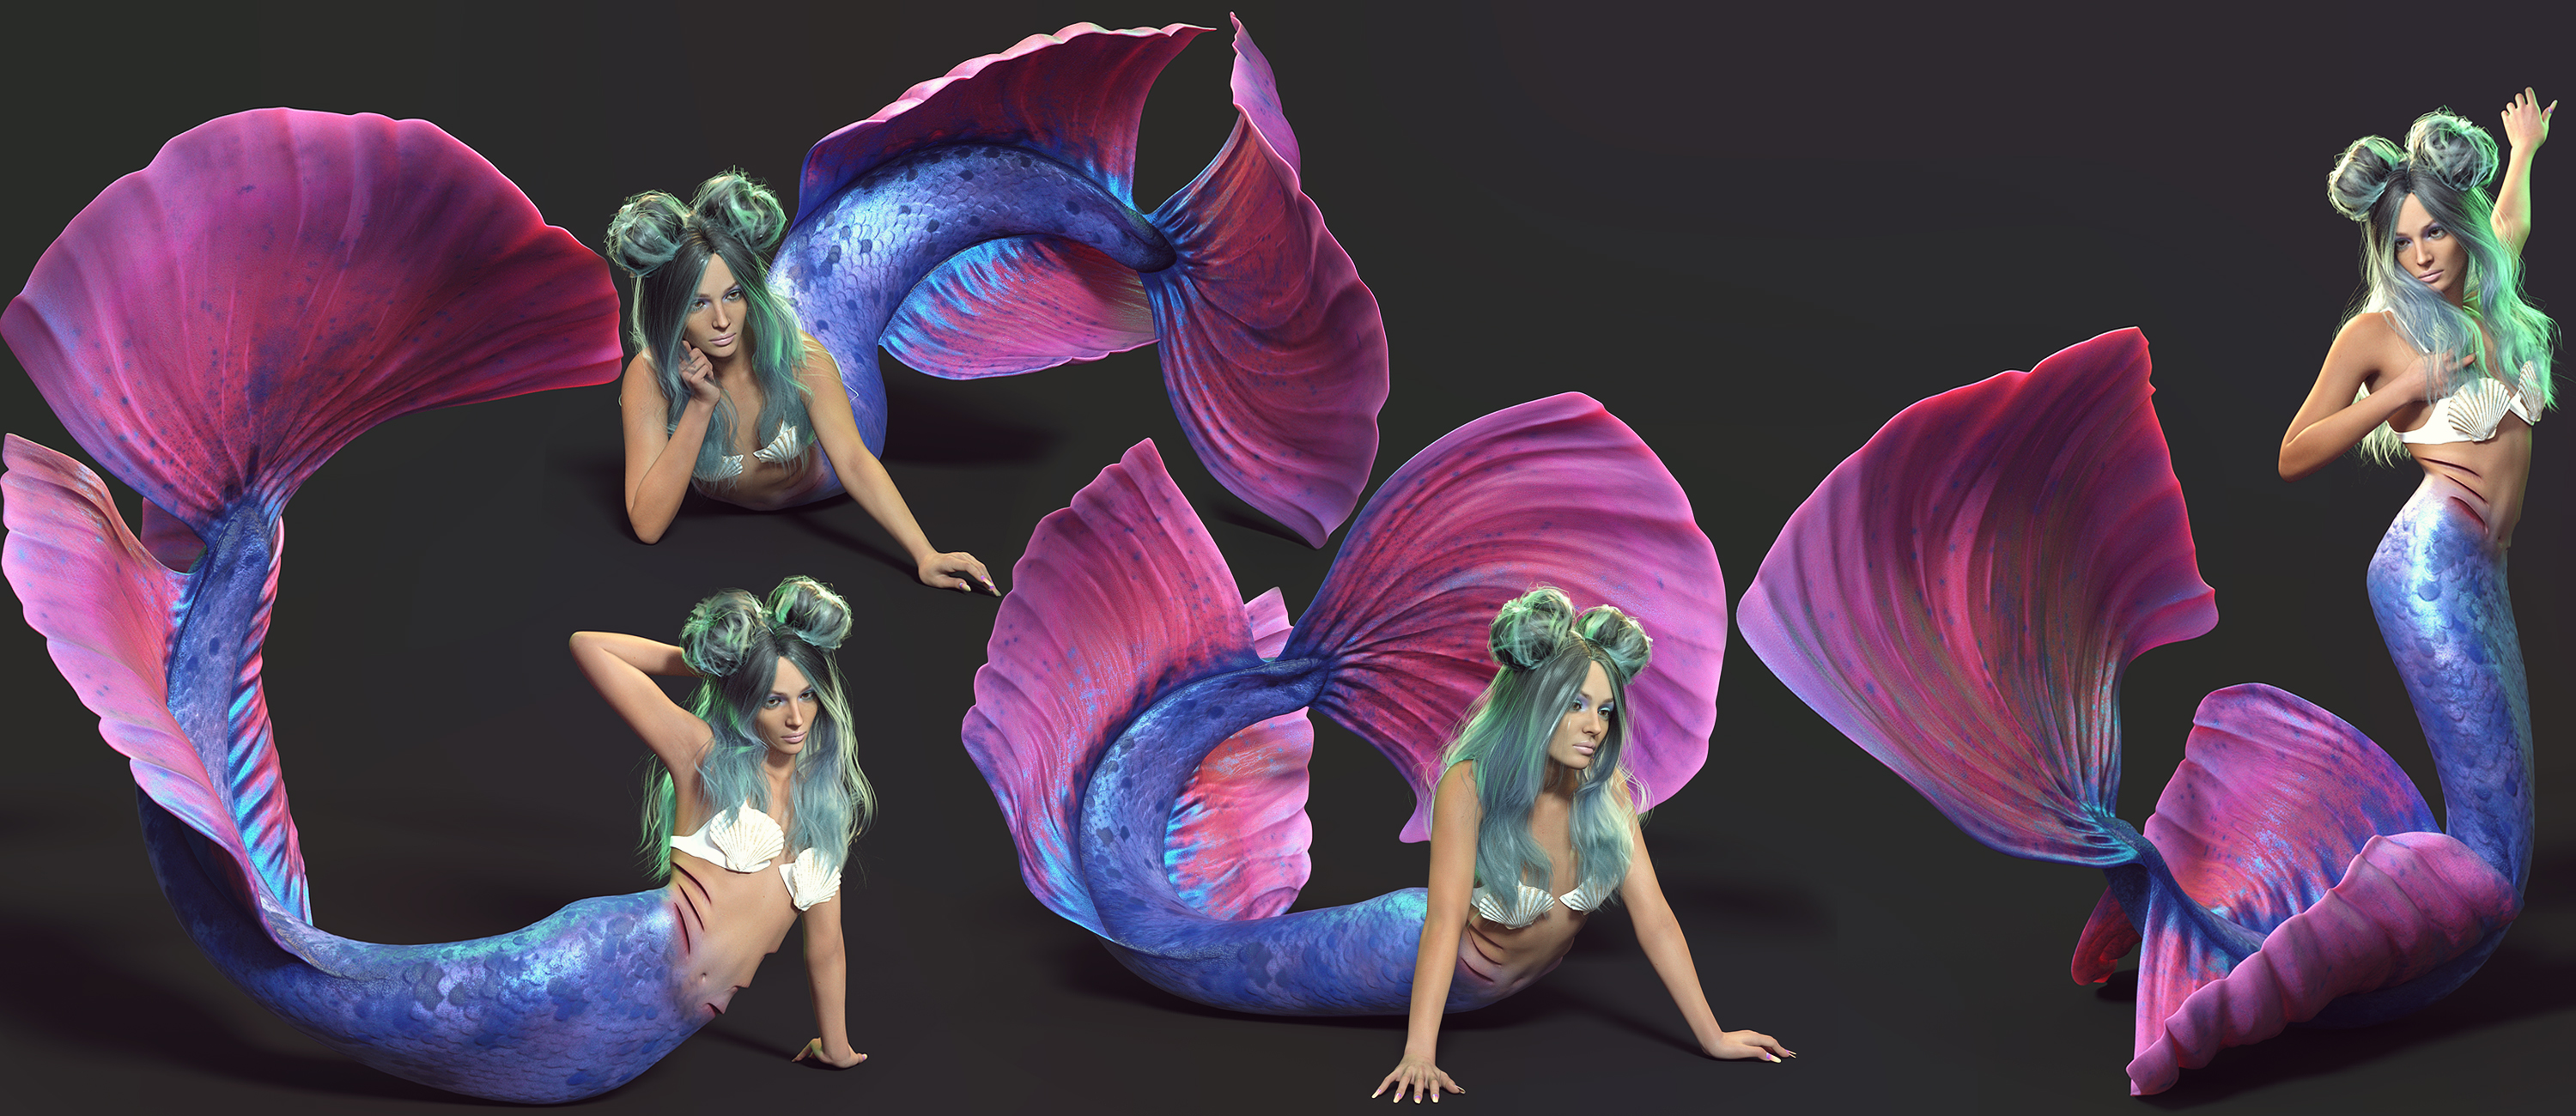 GF Mermaid Fantasy Poses for Zale 8.1 and Coral 8.1 by: Nirvana, 3D Models by Daz 3D